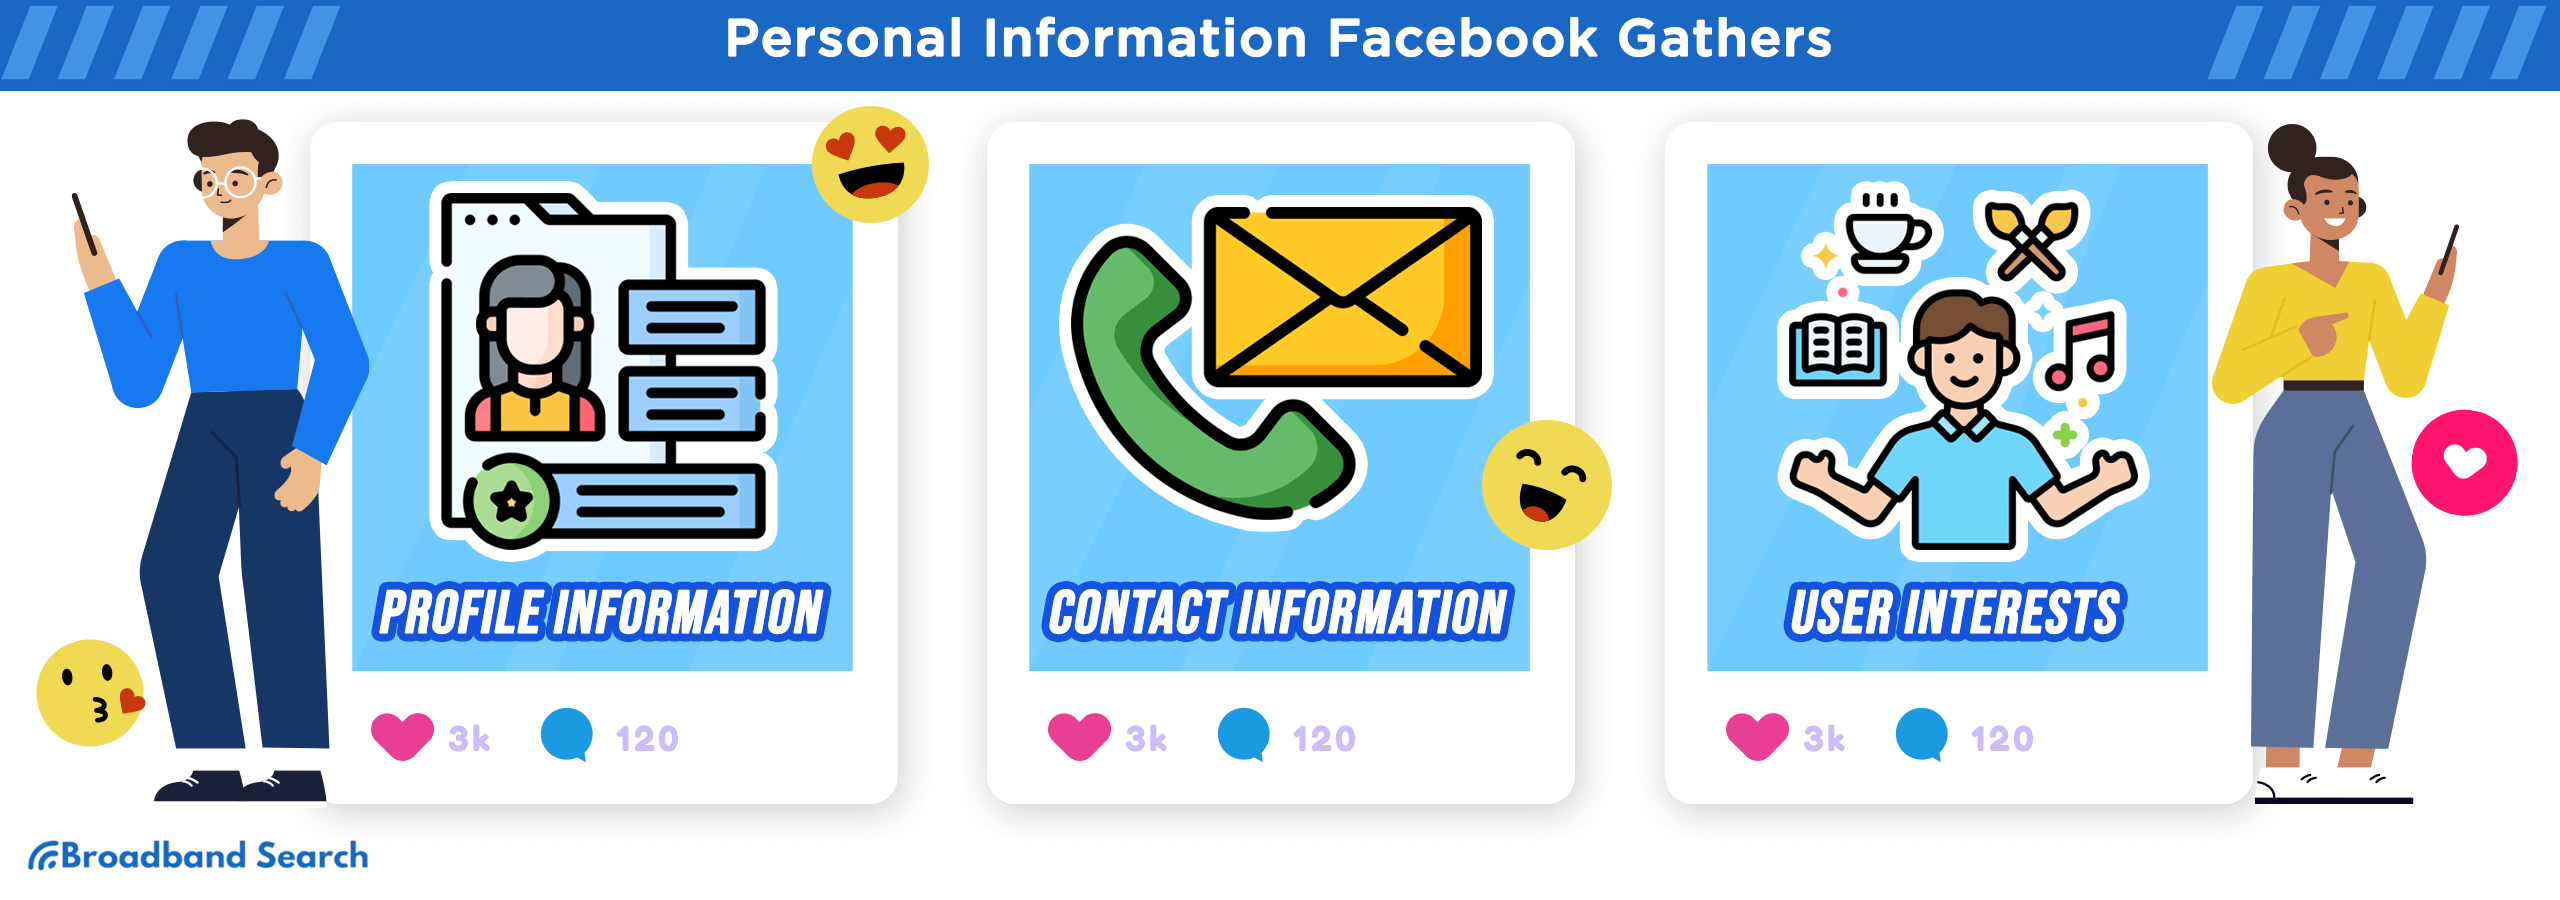 Personal Information facebook gathers